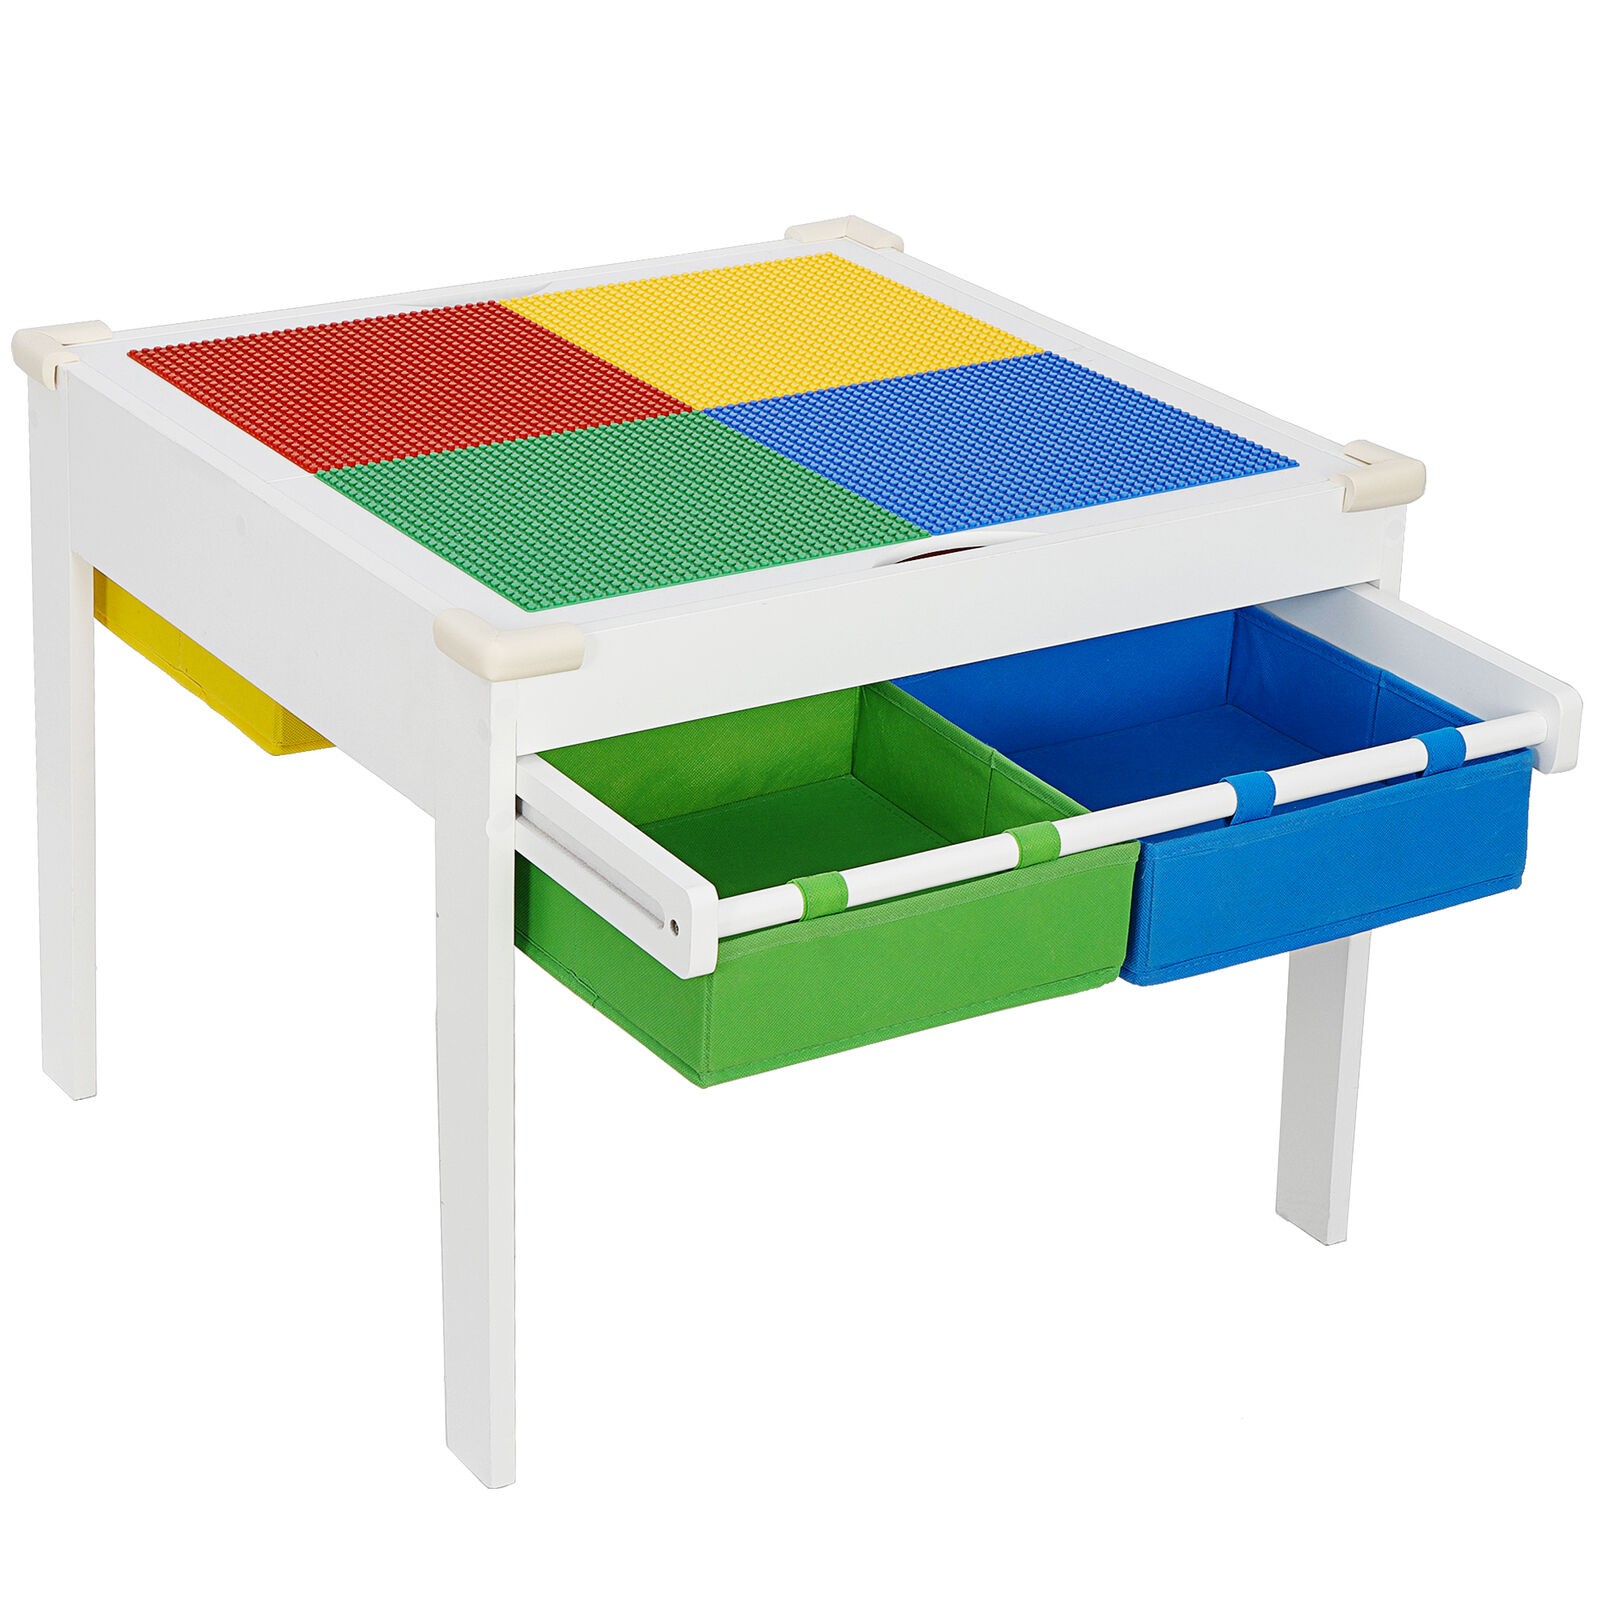 Zenstyle high quality kids play table with storage drawers